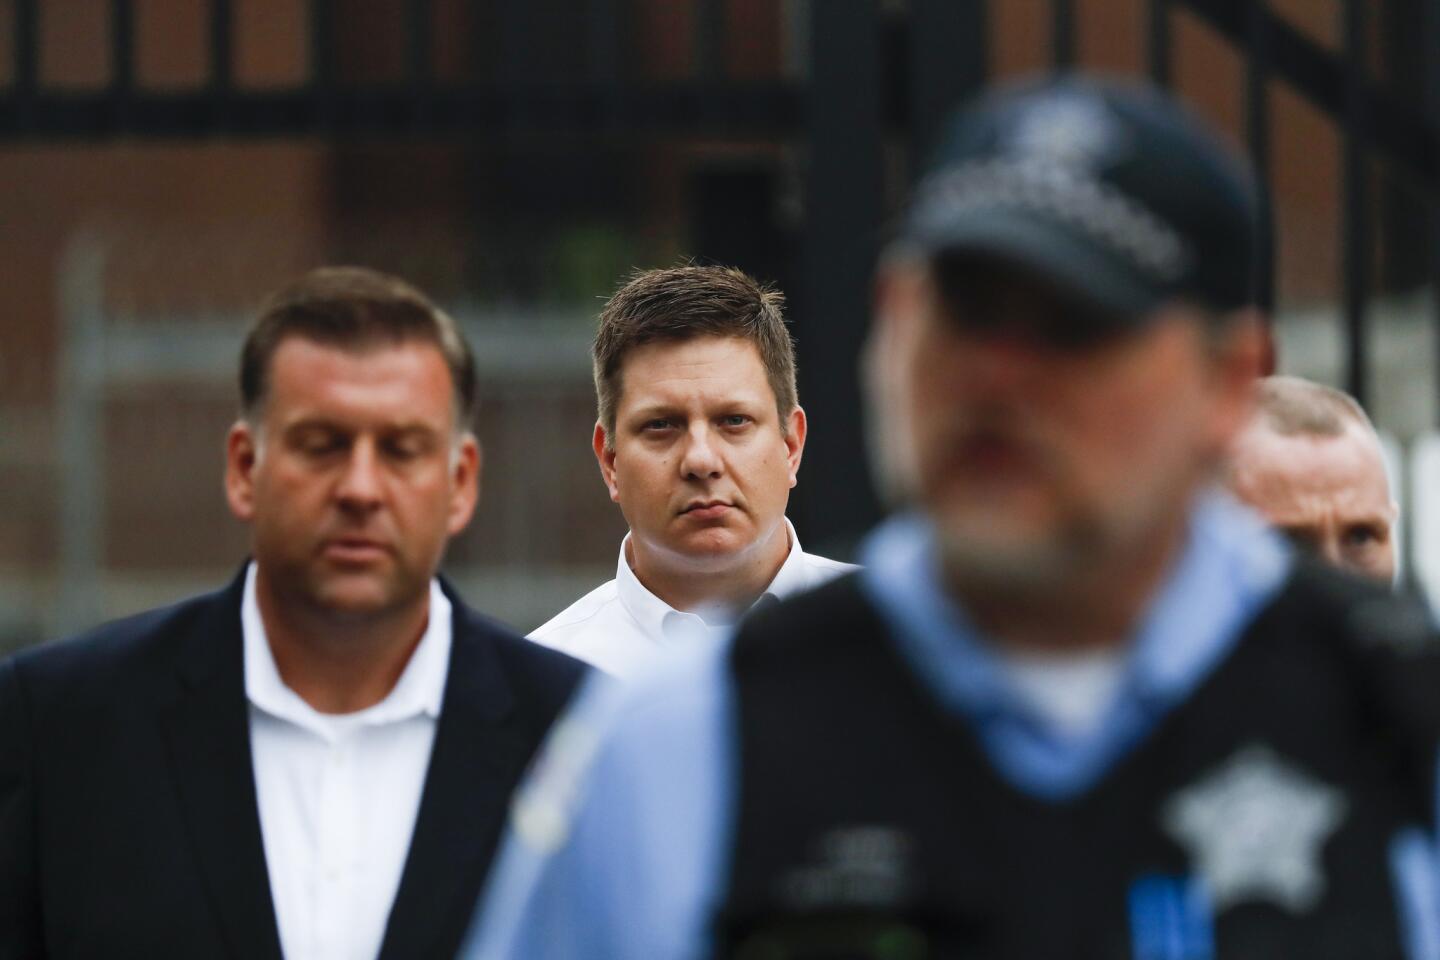 Chicago police Officer Jason Van Dyke leaves Cook County Jail on Sept. 6, 2018, after a brief detention for violating a gag order in his murder case.